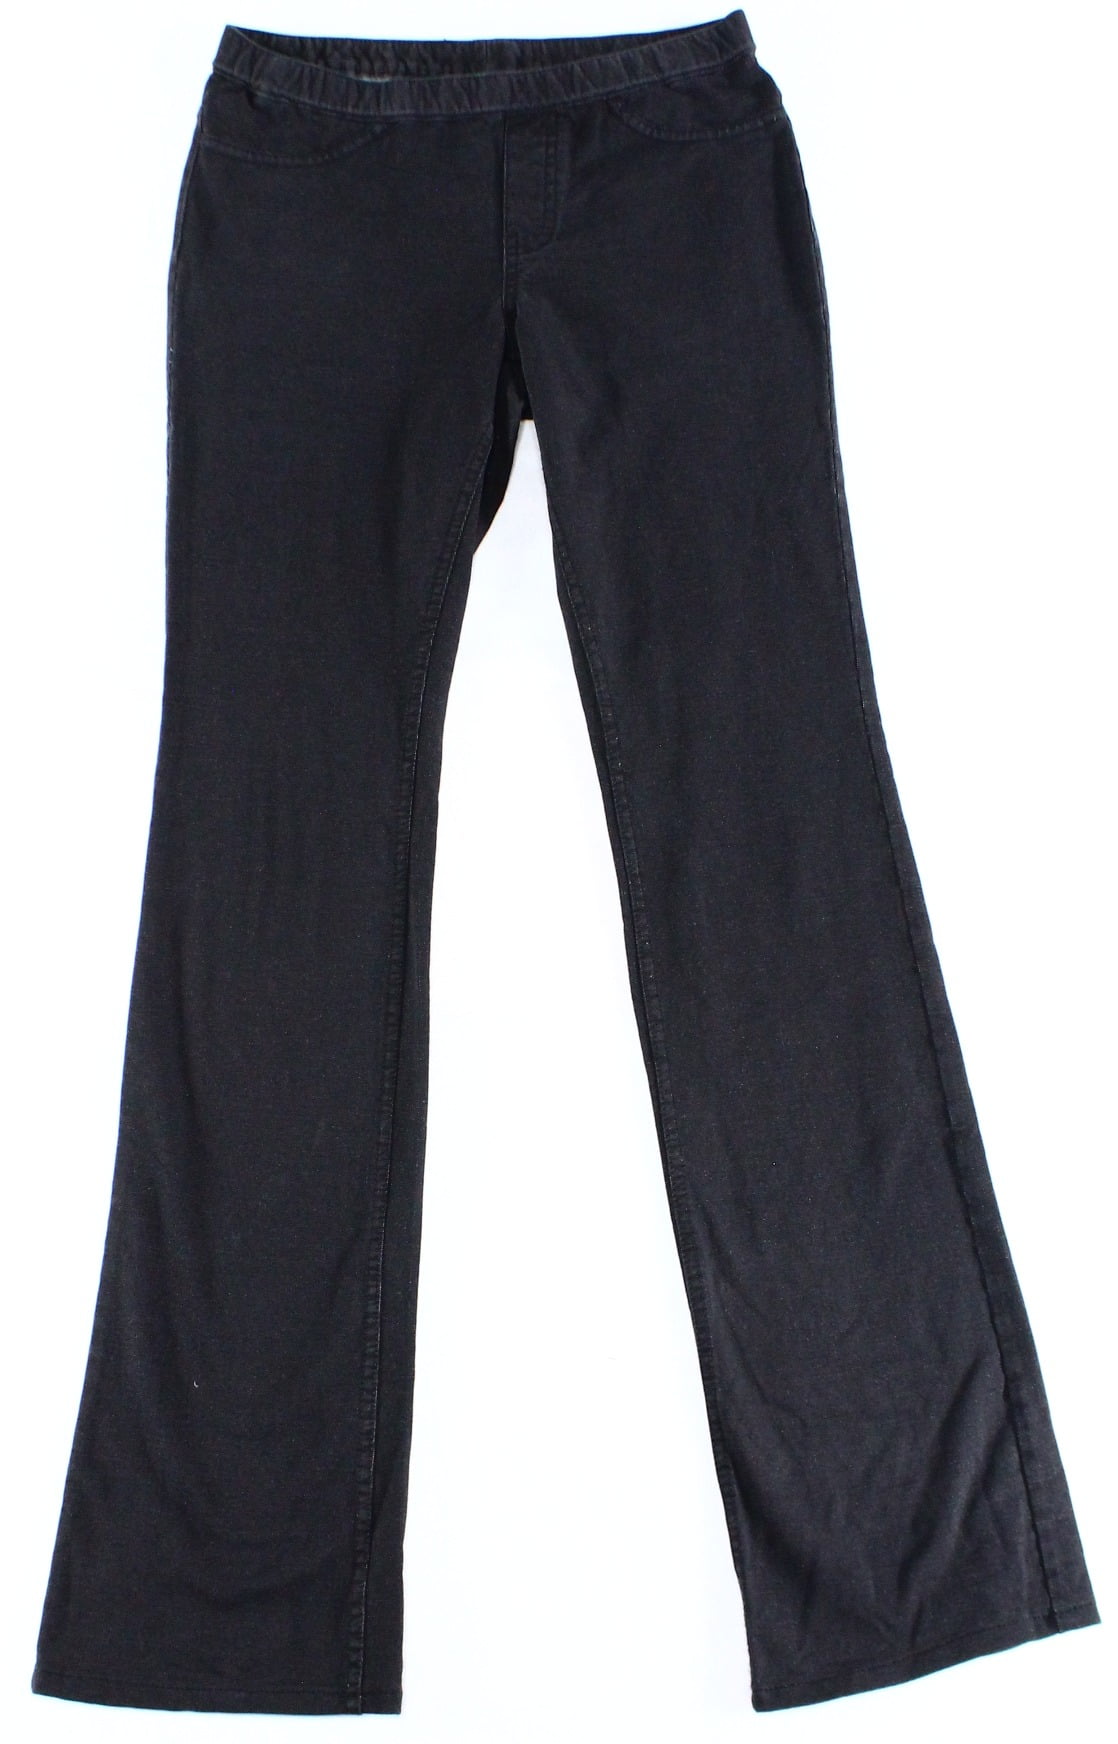 Hue - Hue NEW Black Womens Size Small S Pull-On Stretch Casual Pants ...